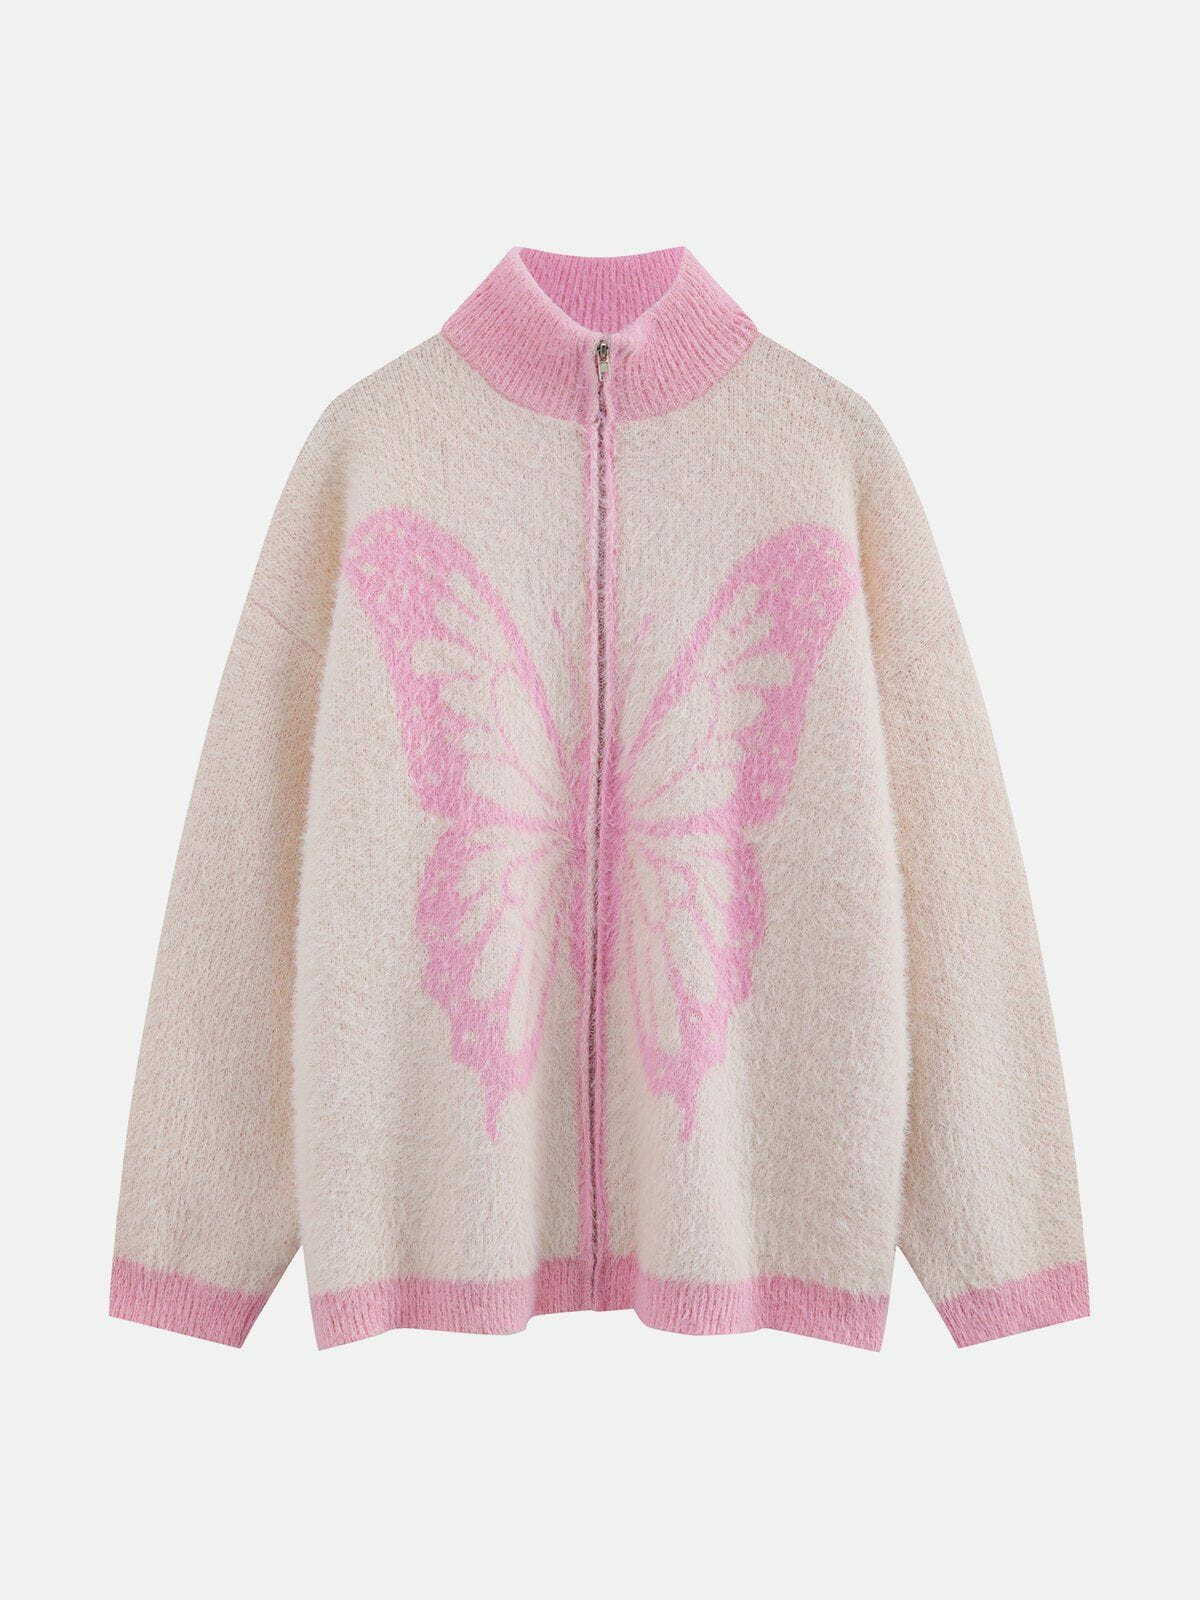 chic butterfly zip cardigan   youthful & trendy appeal 2973